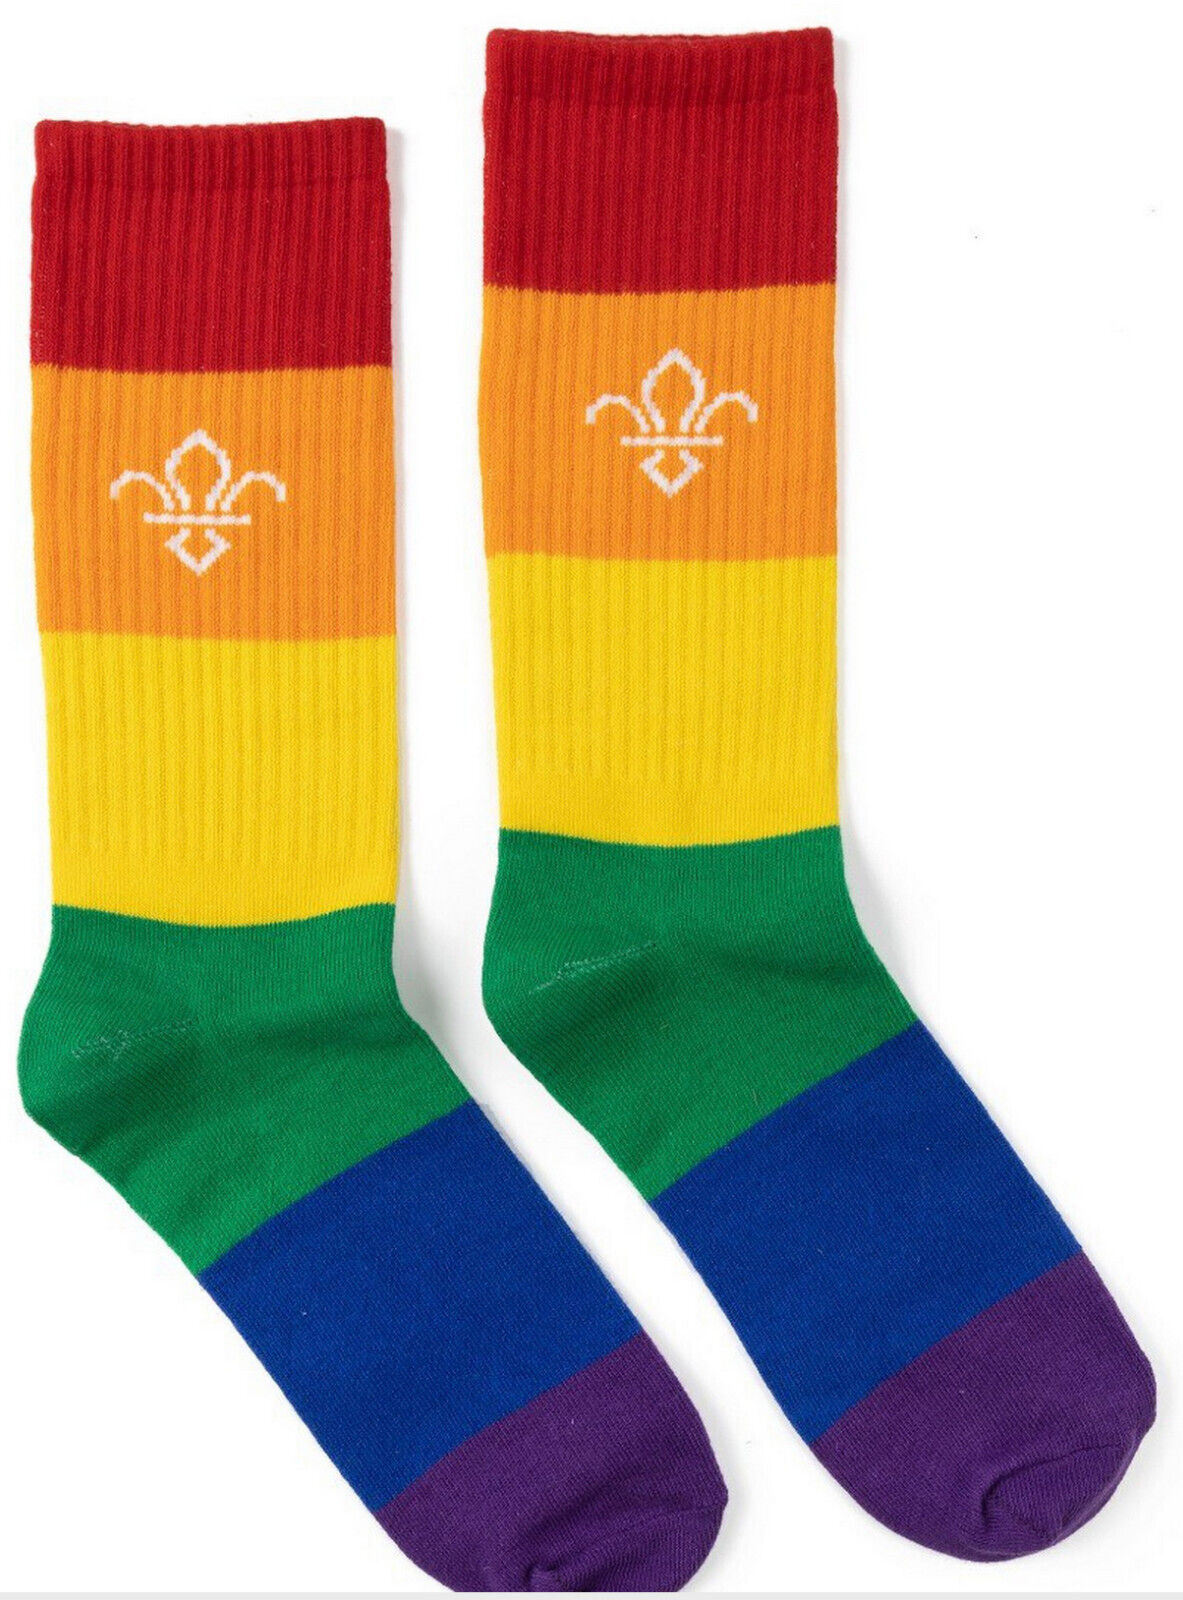 Scout World Socks - Pride Scout Socks (pair) from Gilwel, UK